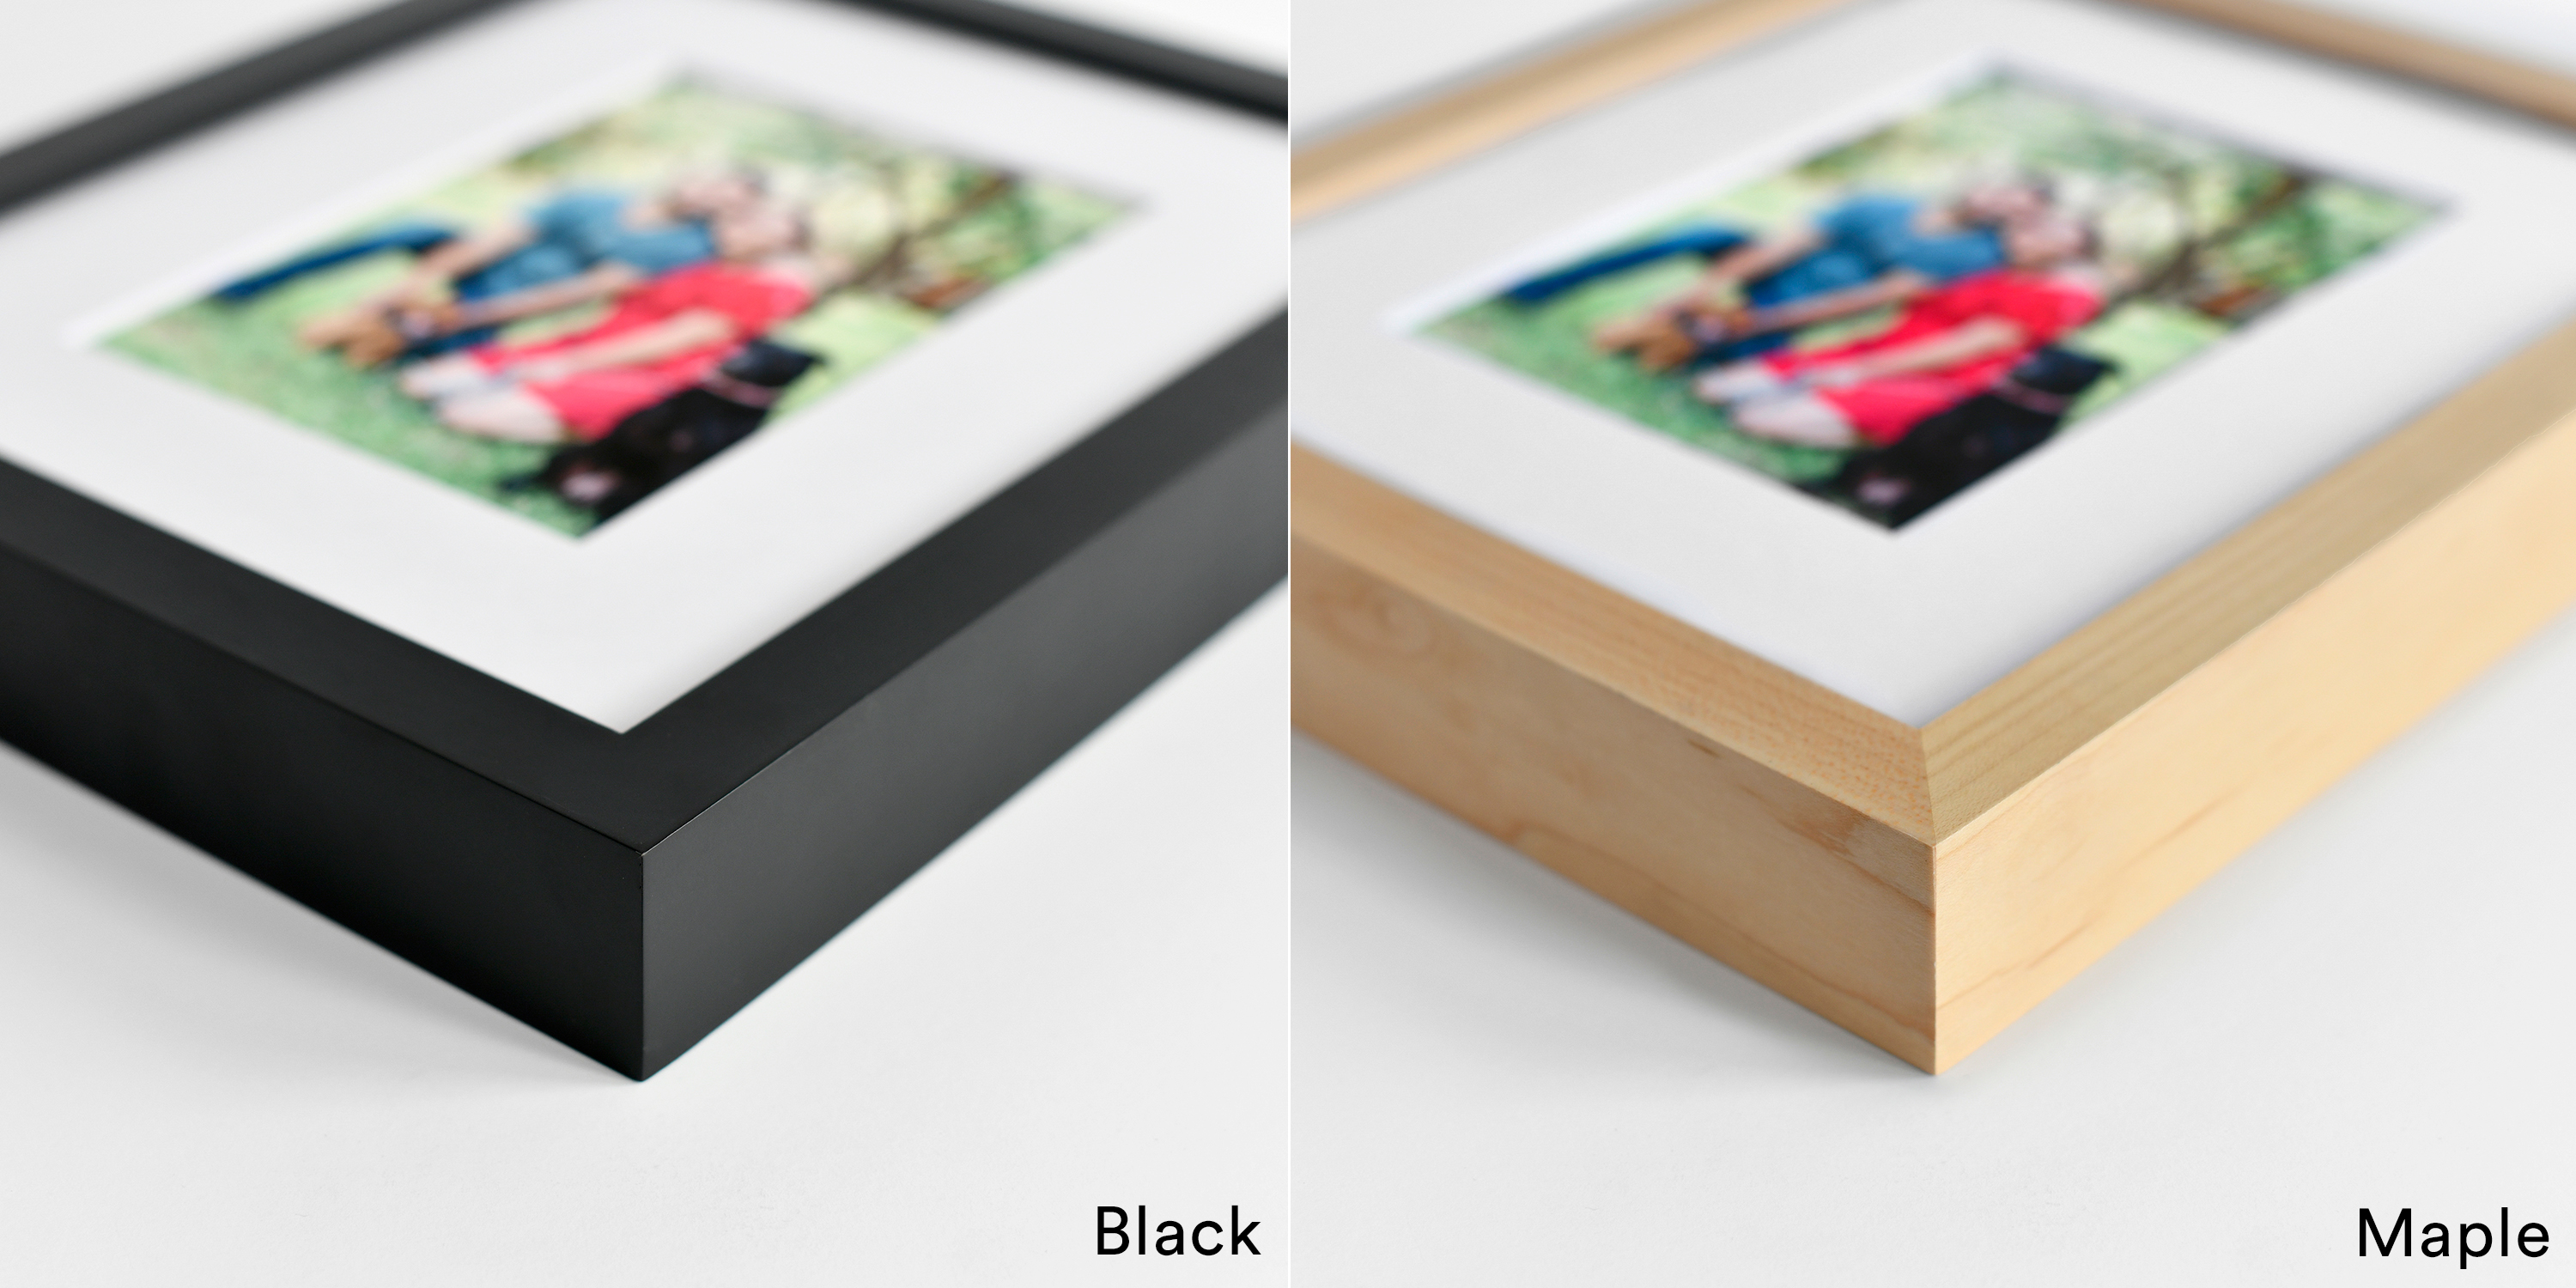 Say Hello to Framed Fine Art Prints!